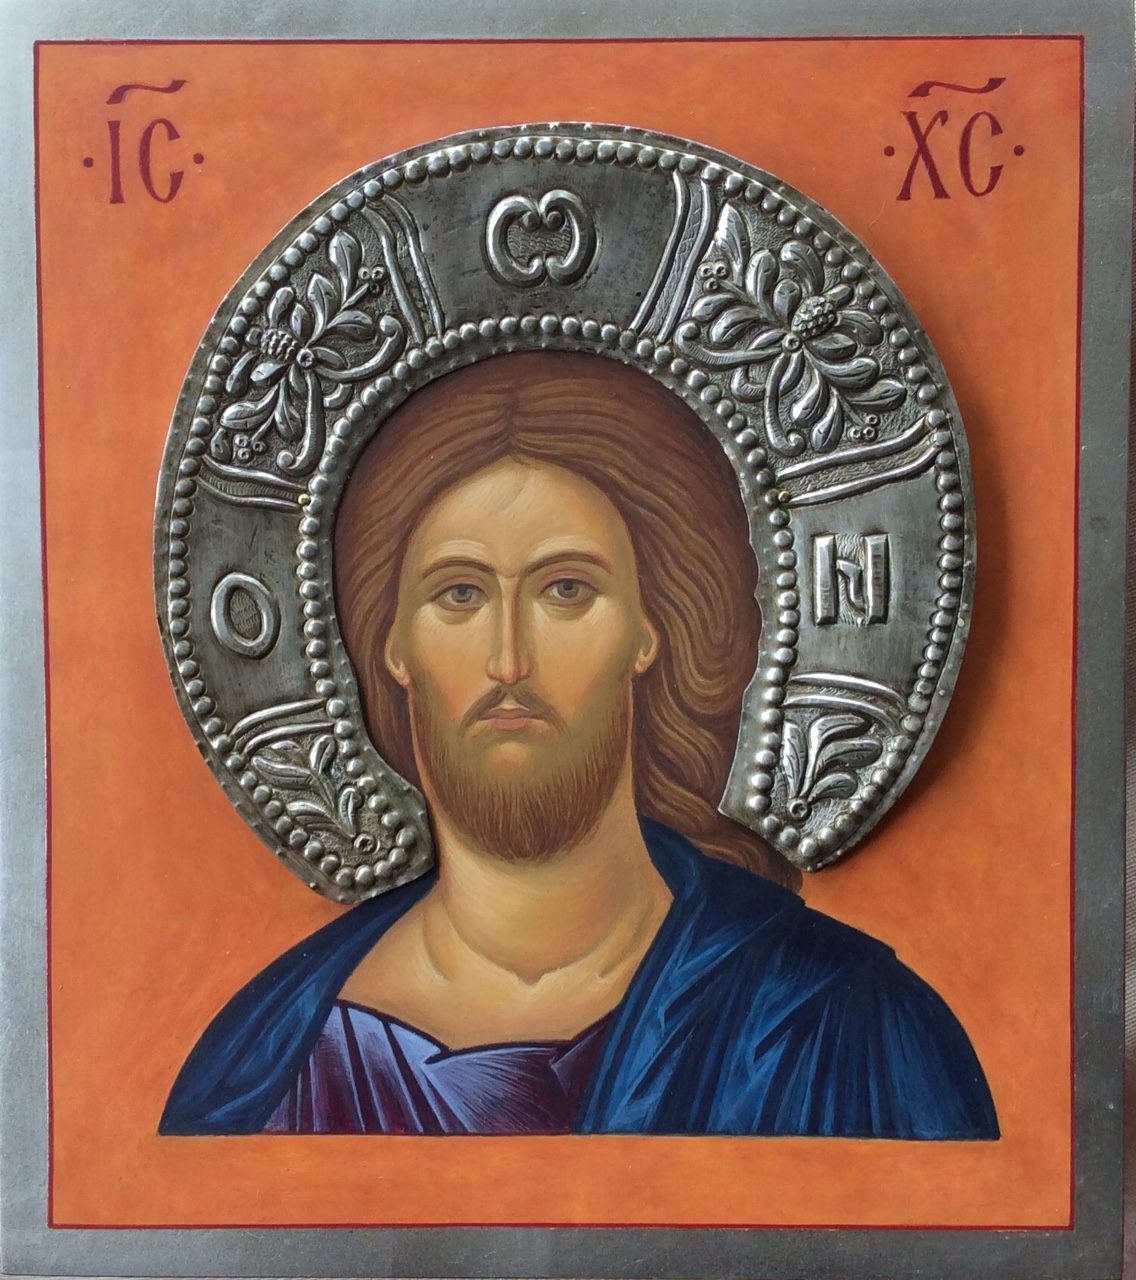 Christ with the fiery face